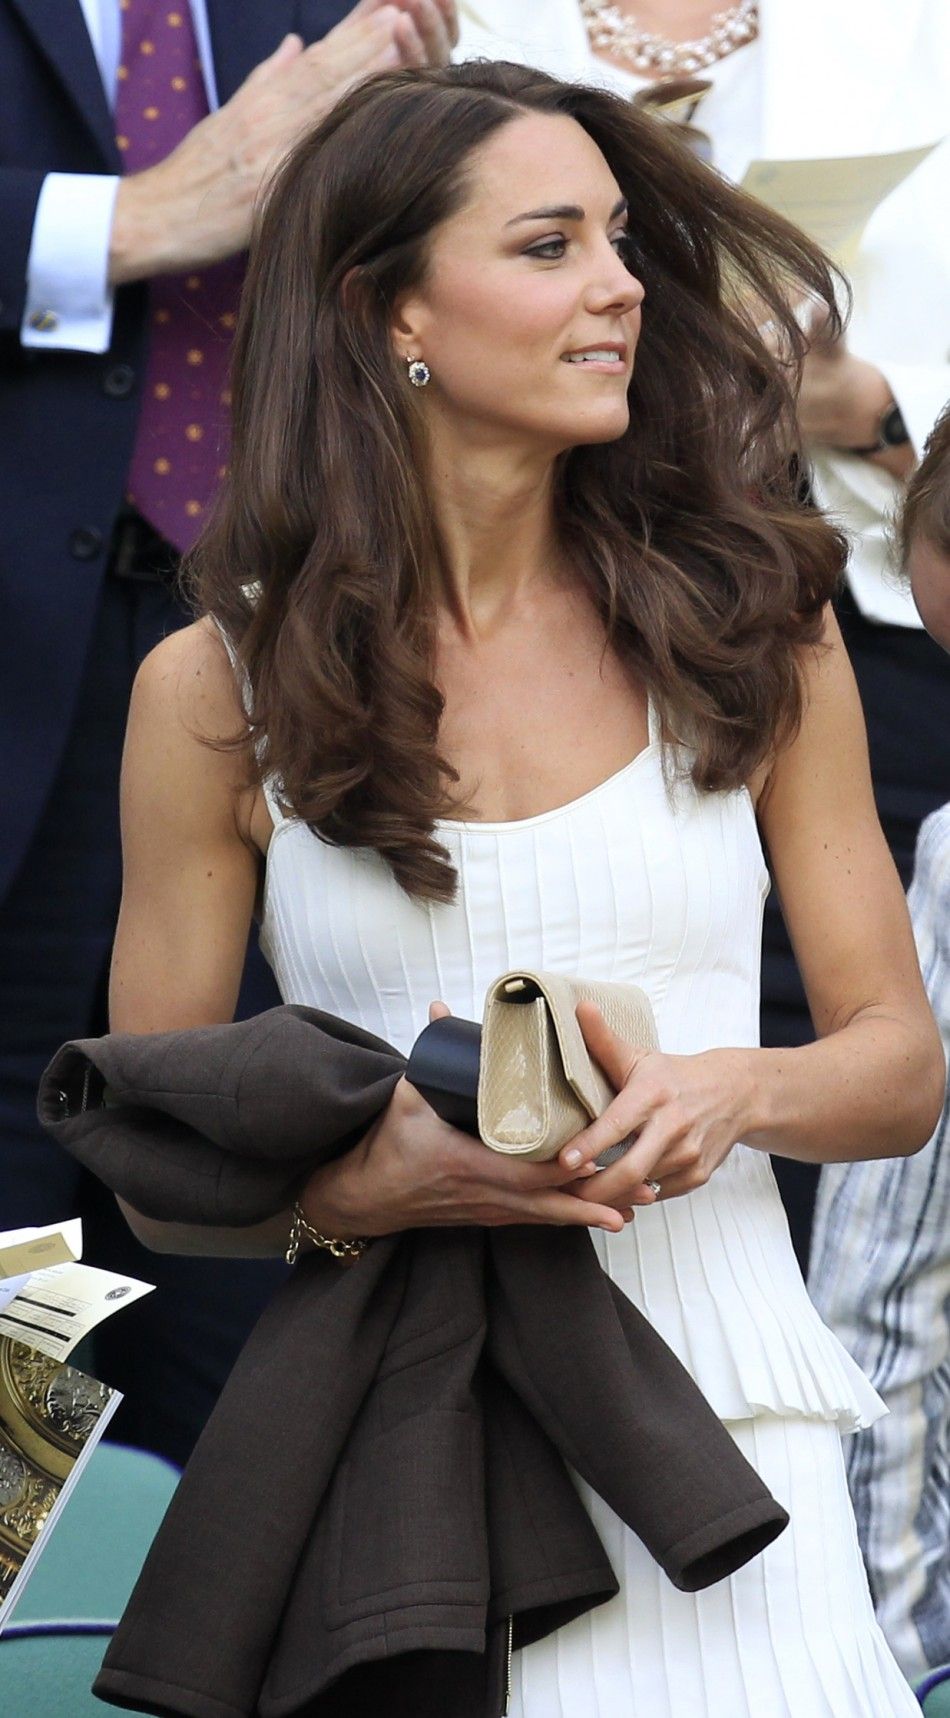 Britain039s Catherine, Duchess of Cambridge arrives on Centre Court for the match between Andy Murray of Britain and Richard Gasquet of France at the Wimbledon tennis championships in London June 27, 2011.